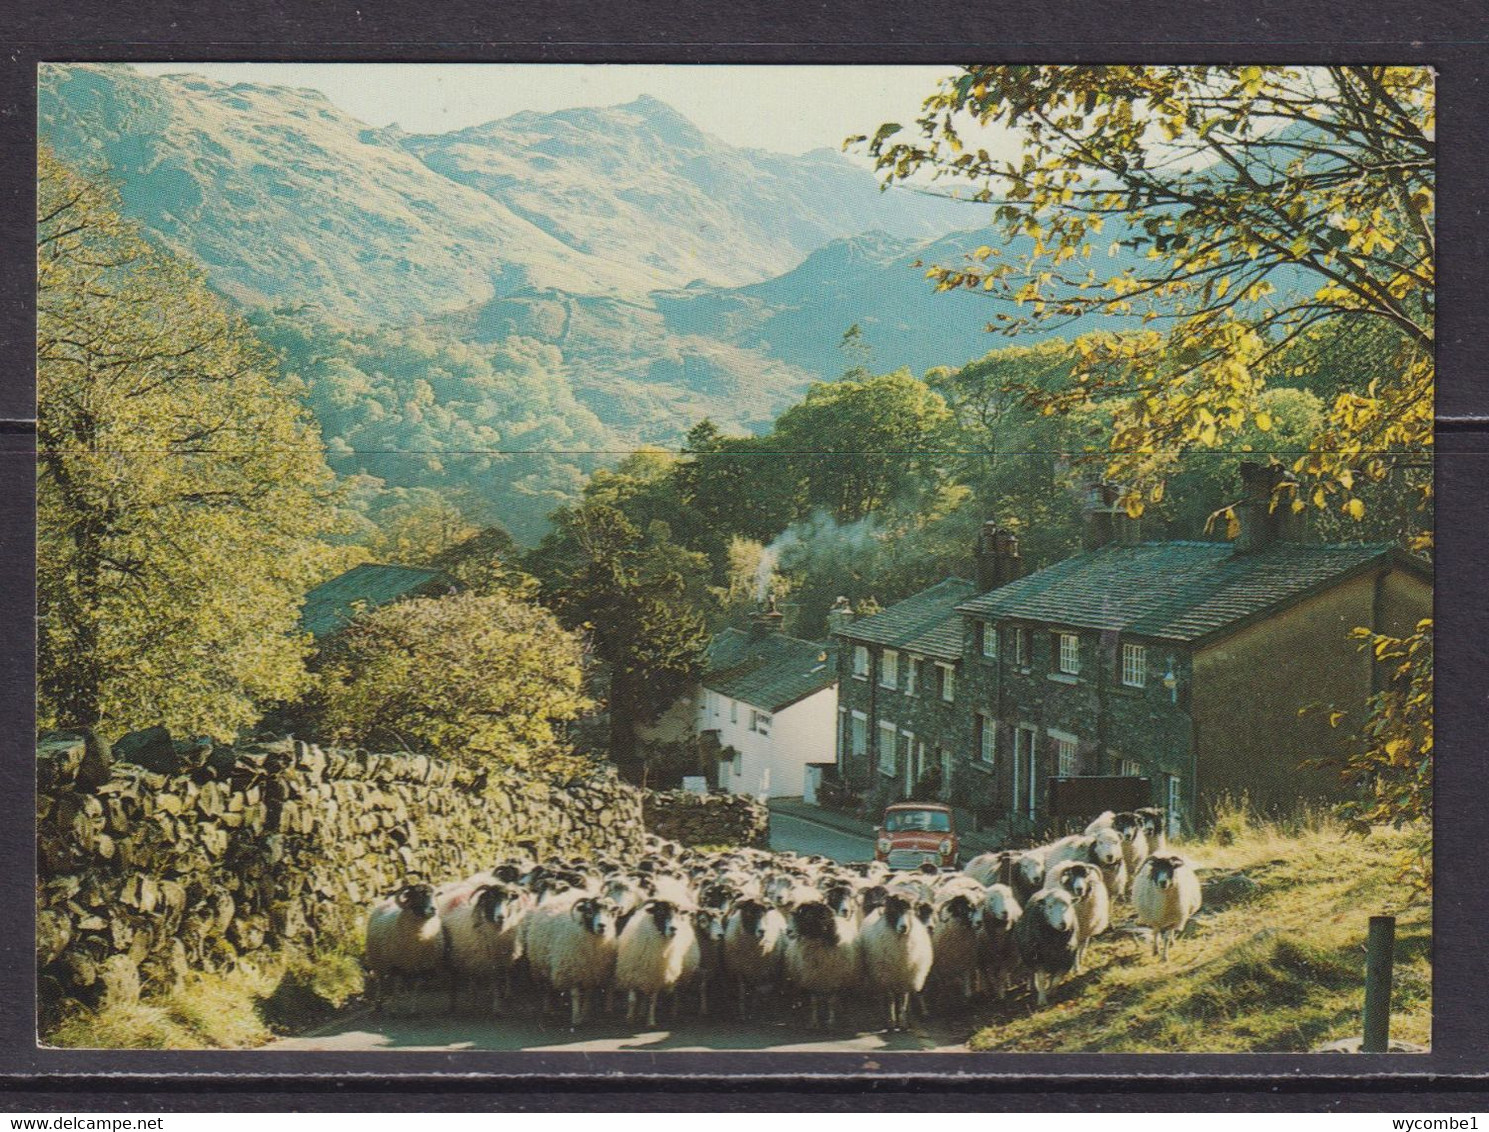 ENGLAND - Seatoller Used Postcard As Scans - Borrowdale